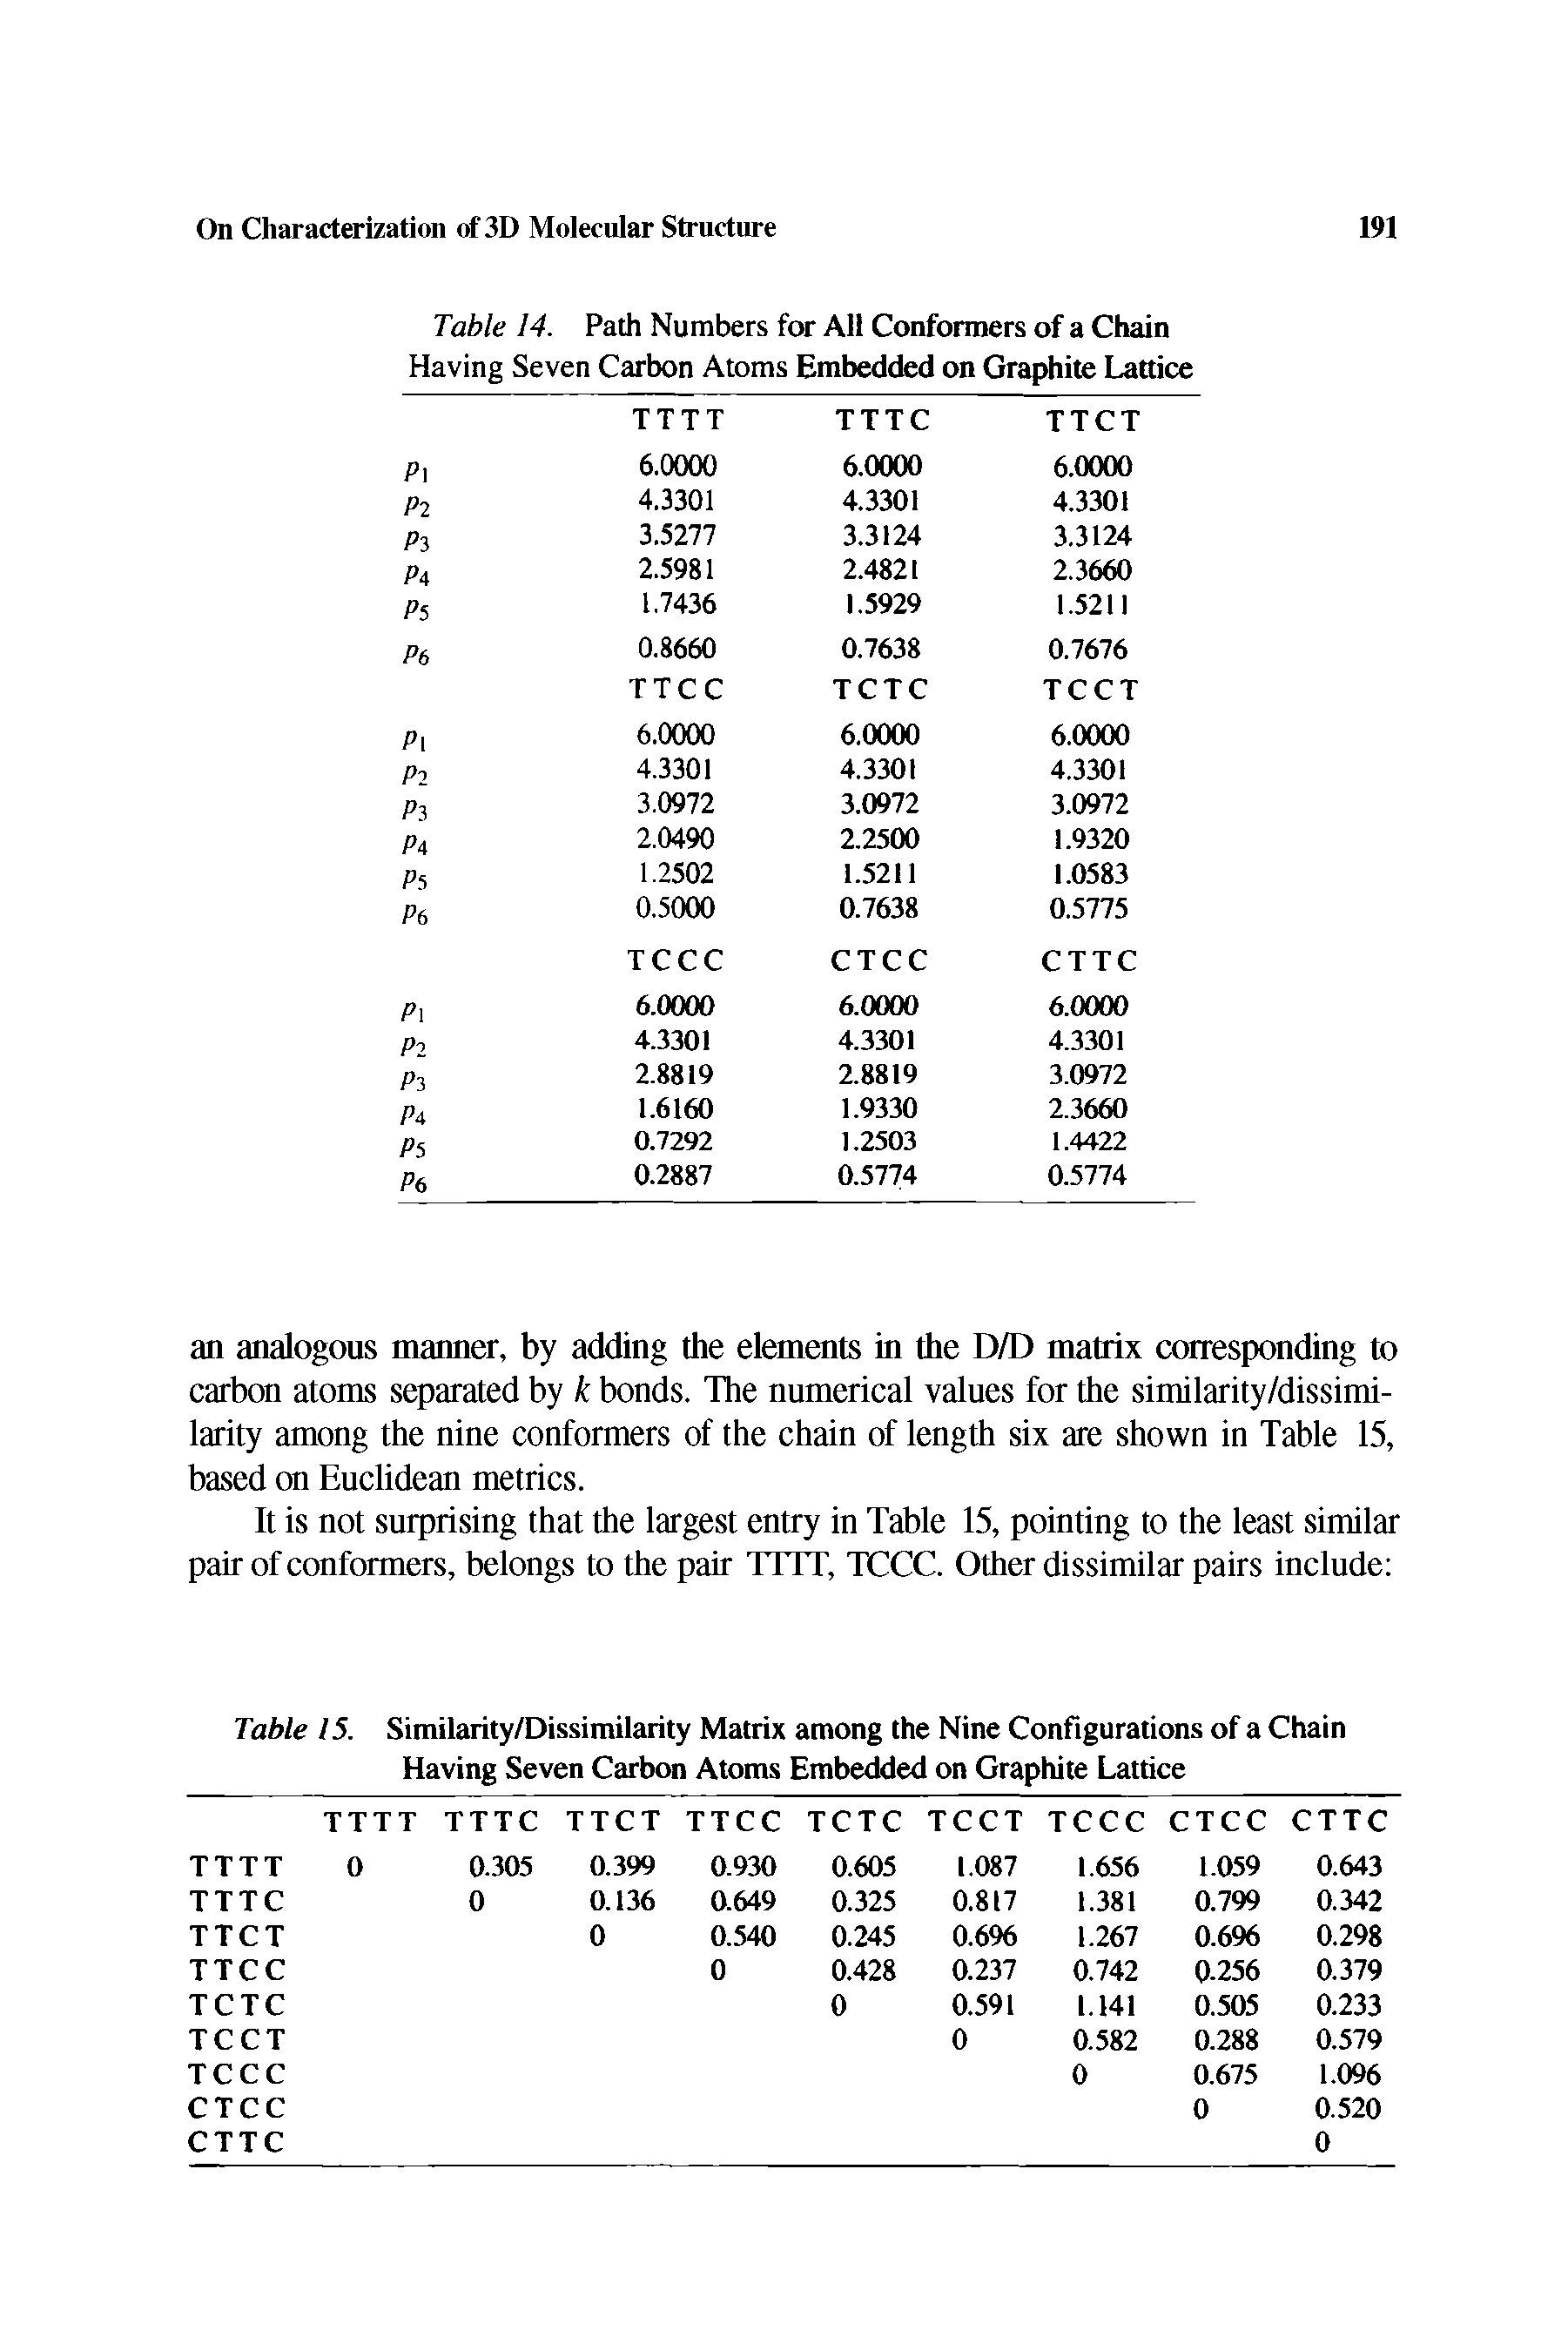 Table 15. Similarity/Dissimilarity Matrix among the Nine Configurations of a Chain ...